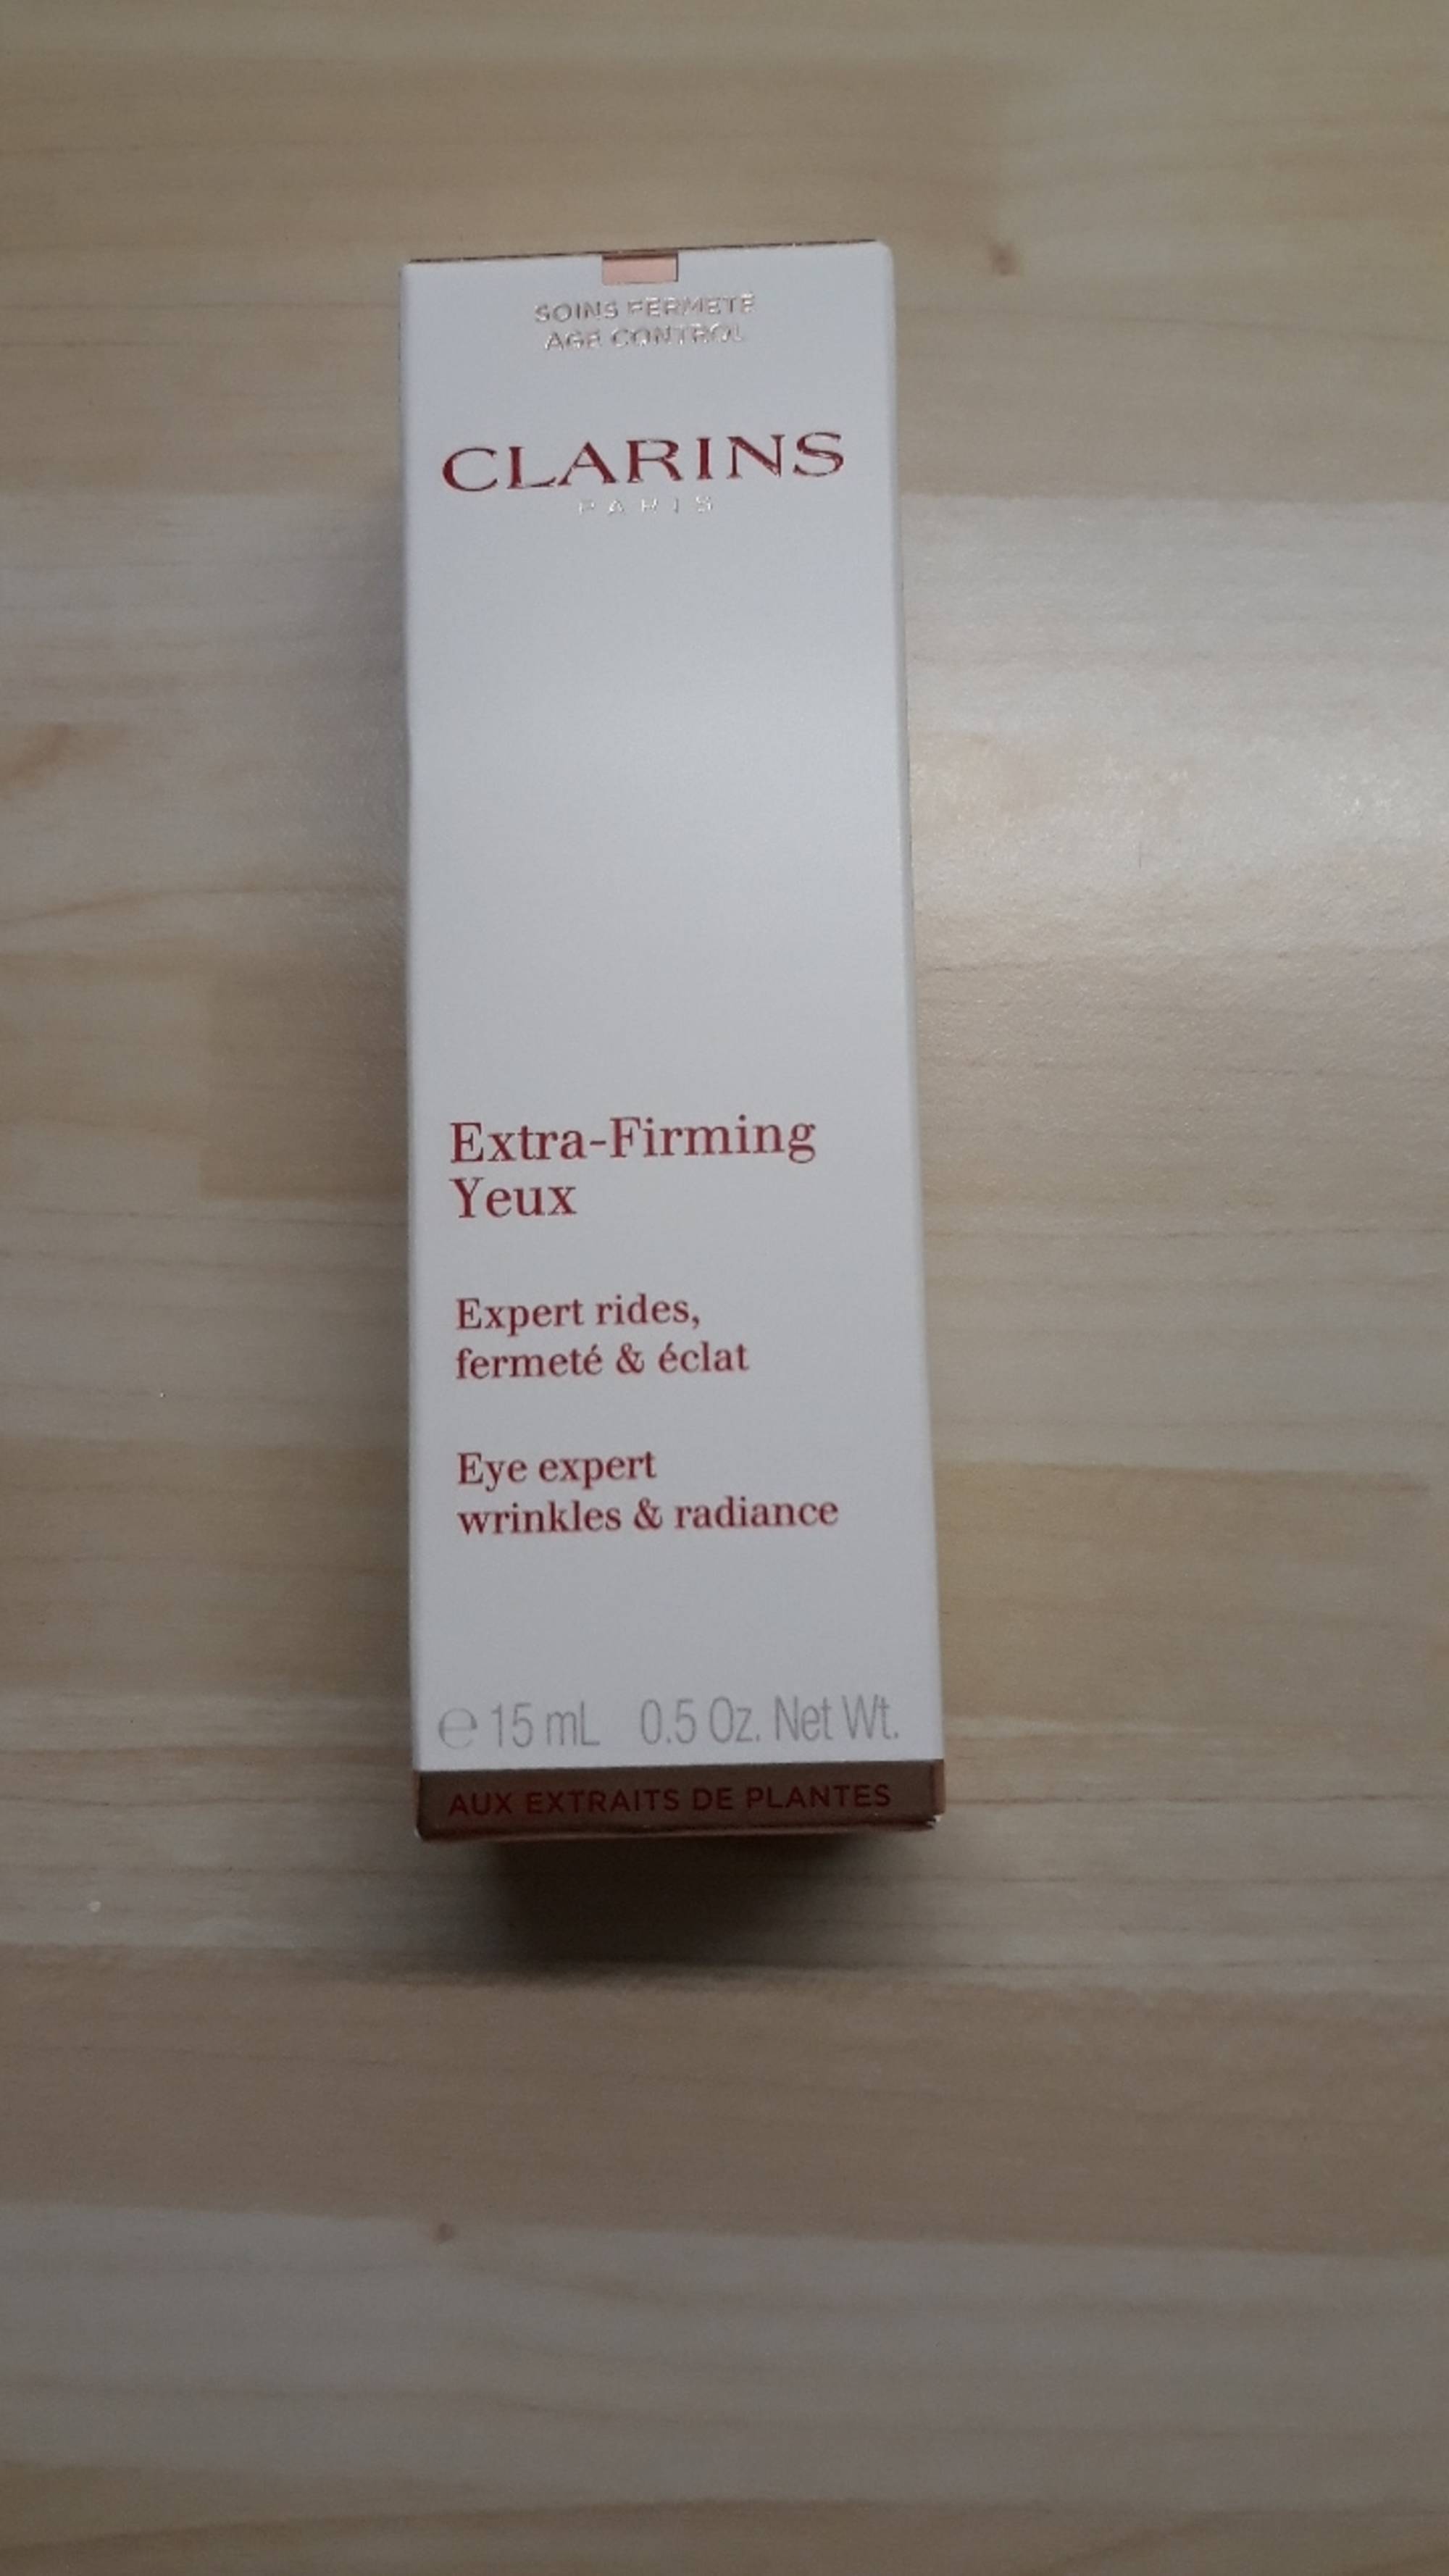 CLARINS - Extra-Firming yeux